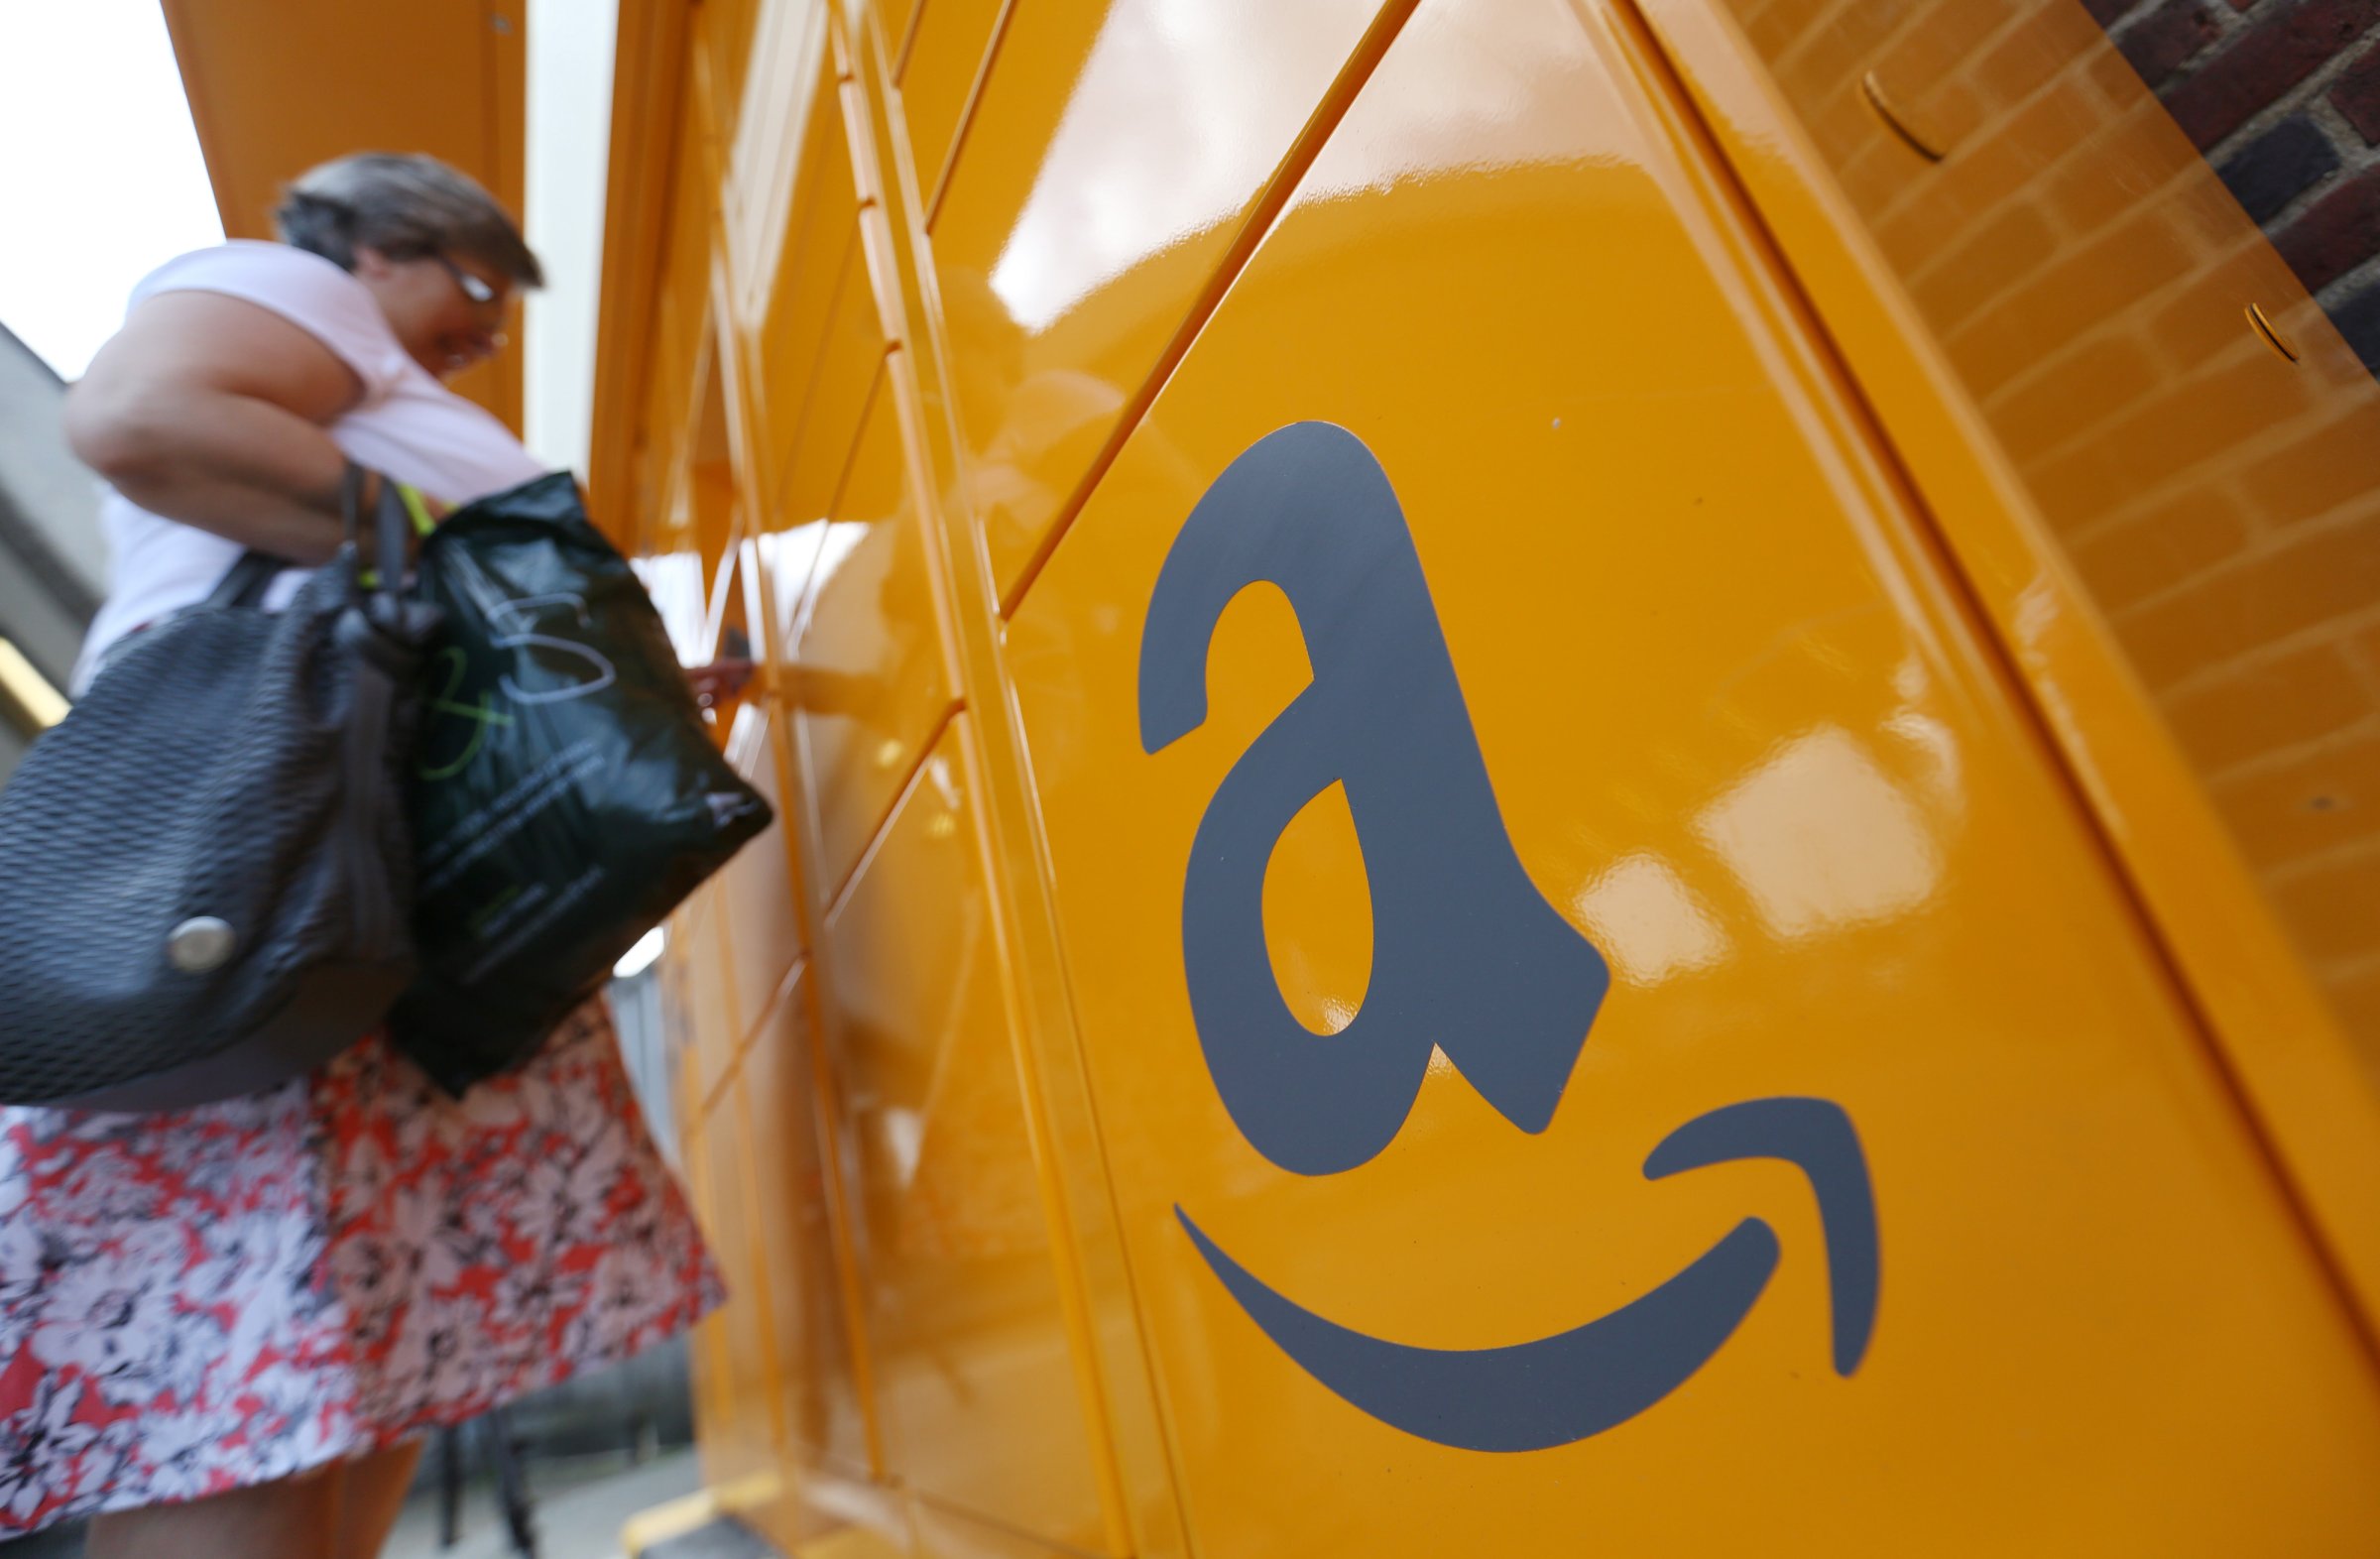 Customers Collect Online Orders From An Amazon.com Inc. Locker